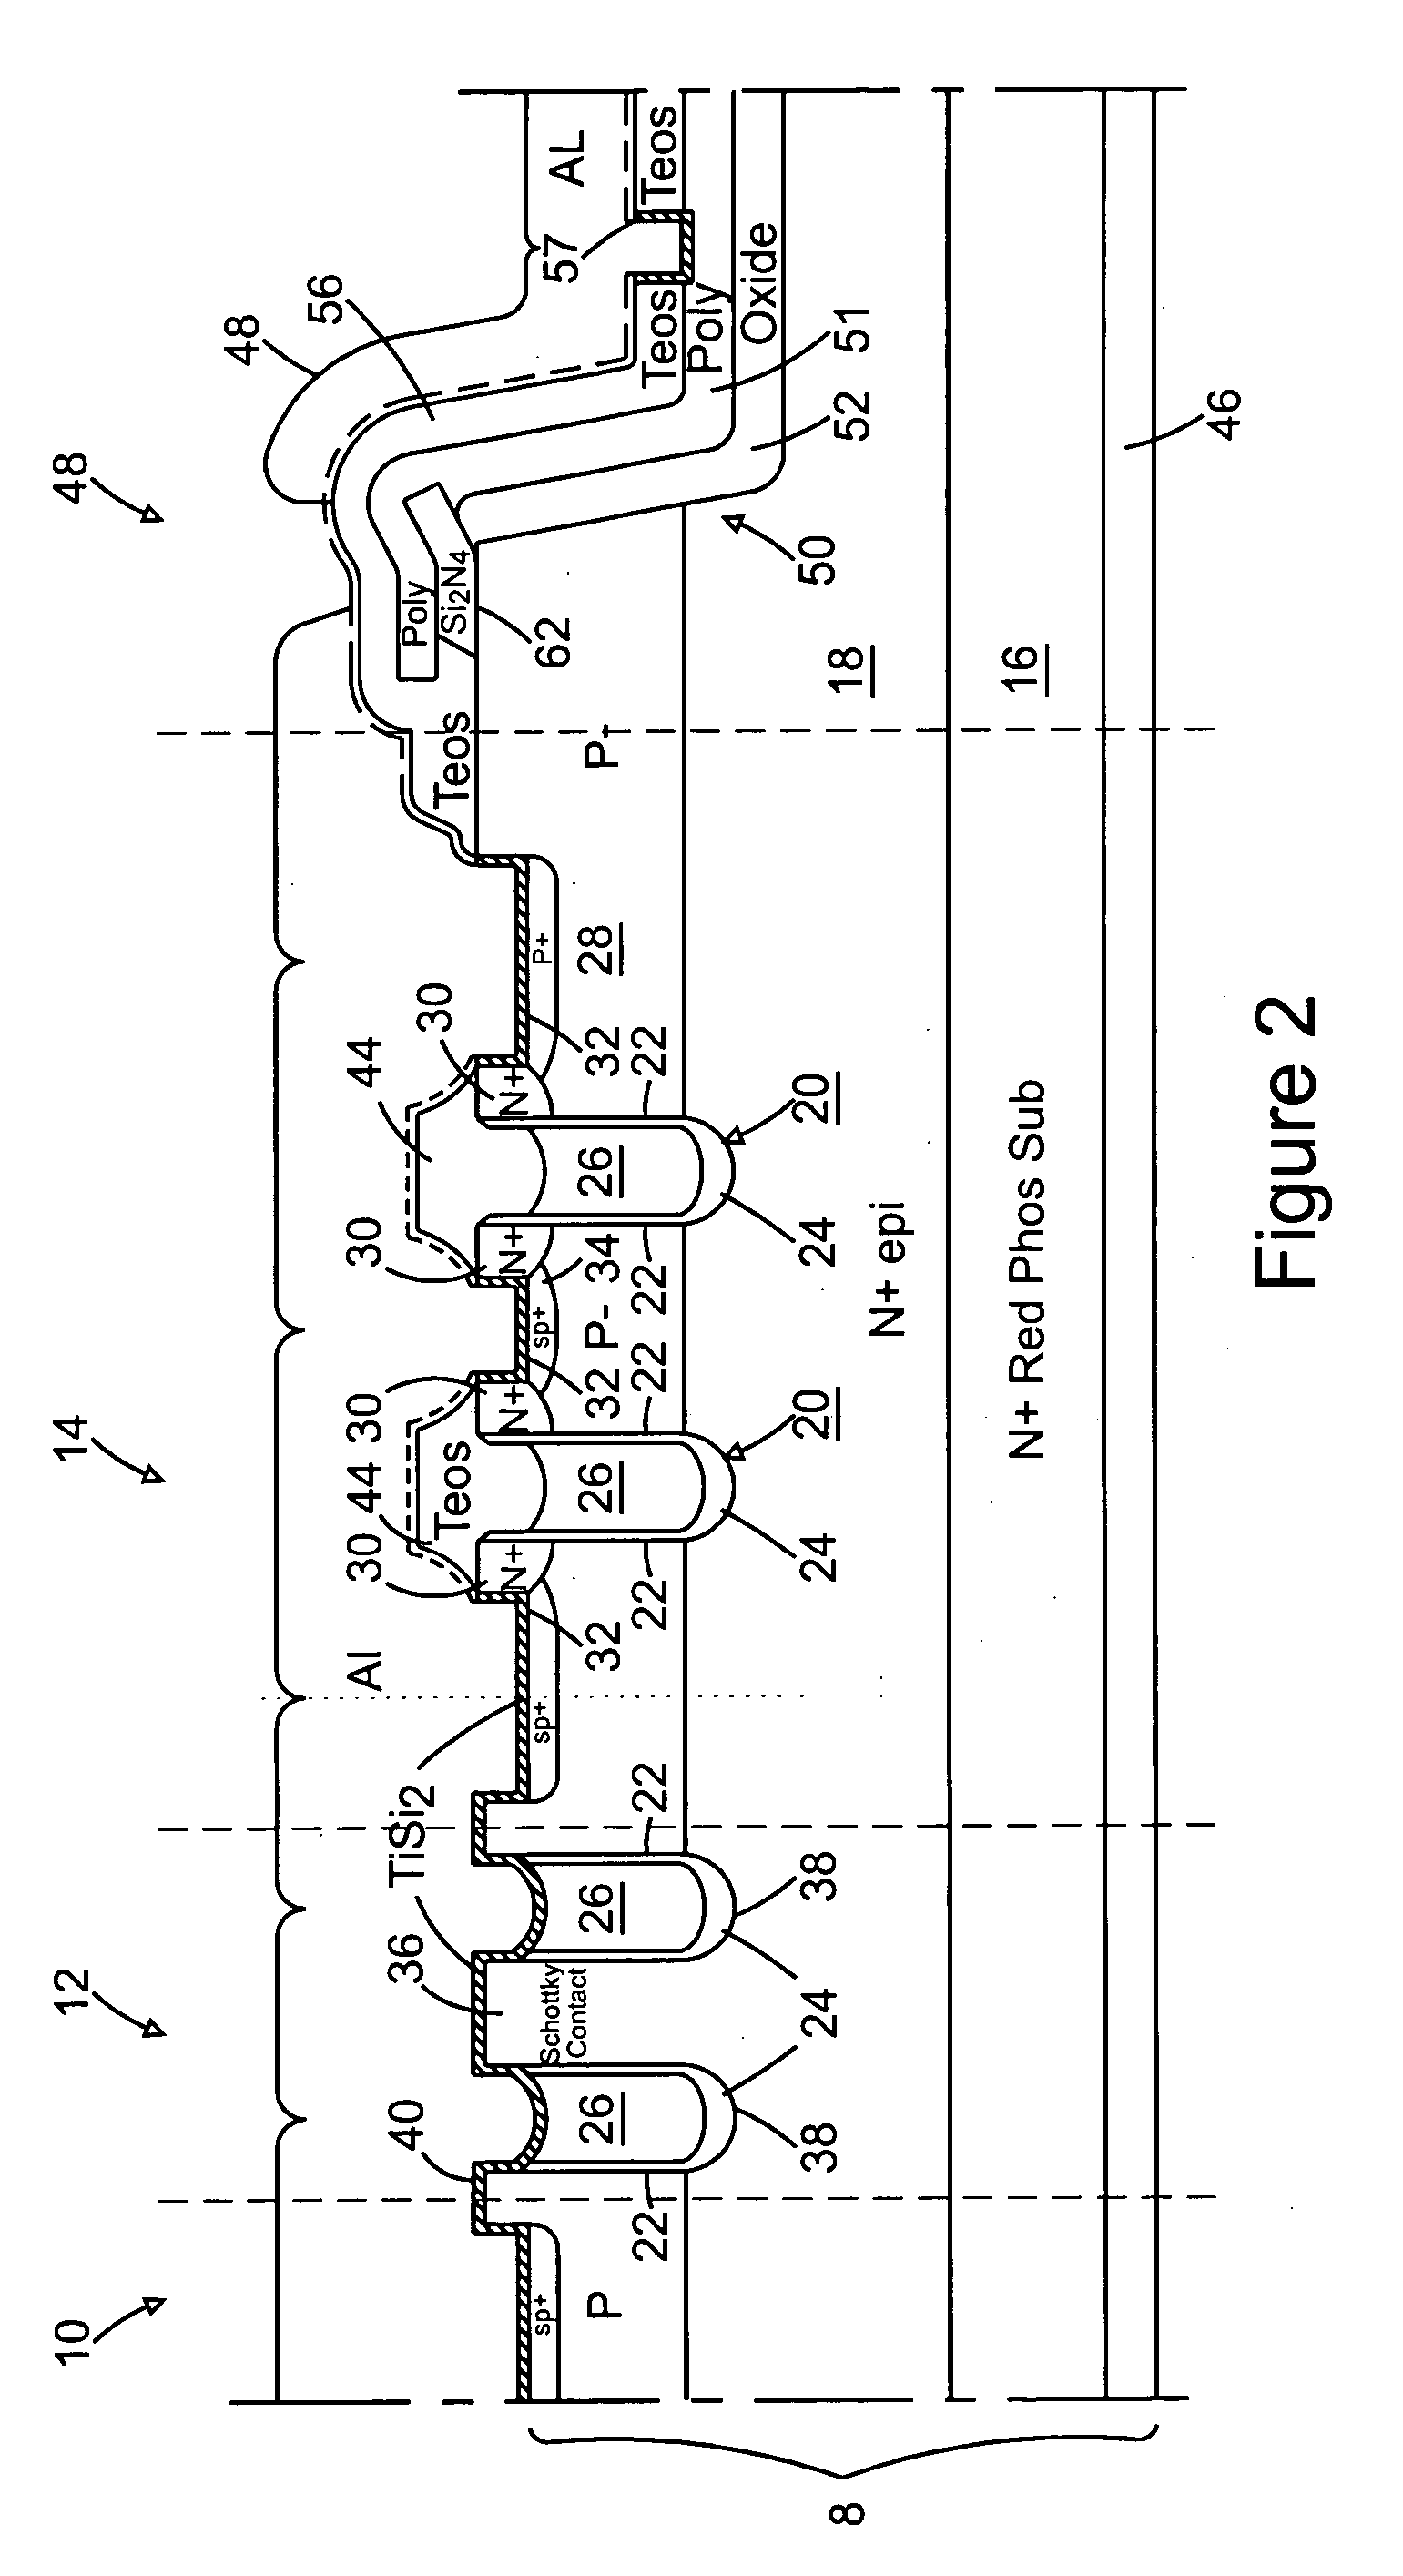 Integrated fet and schottky device